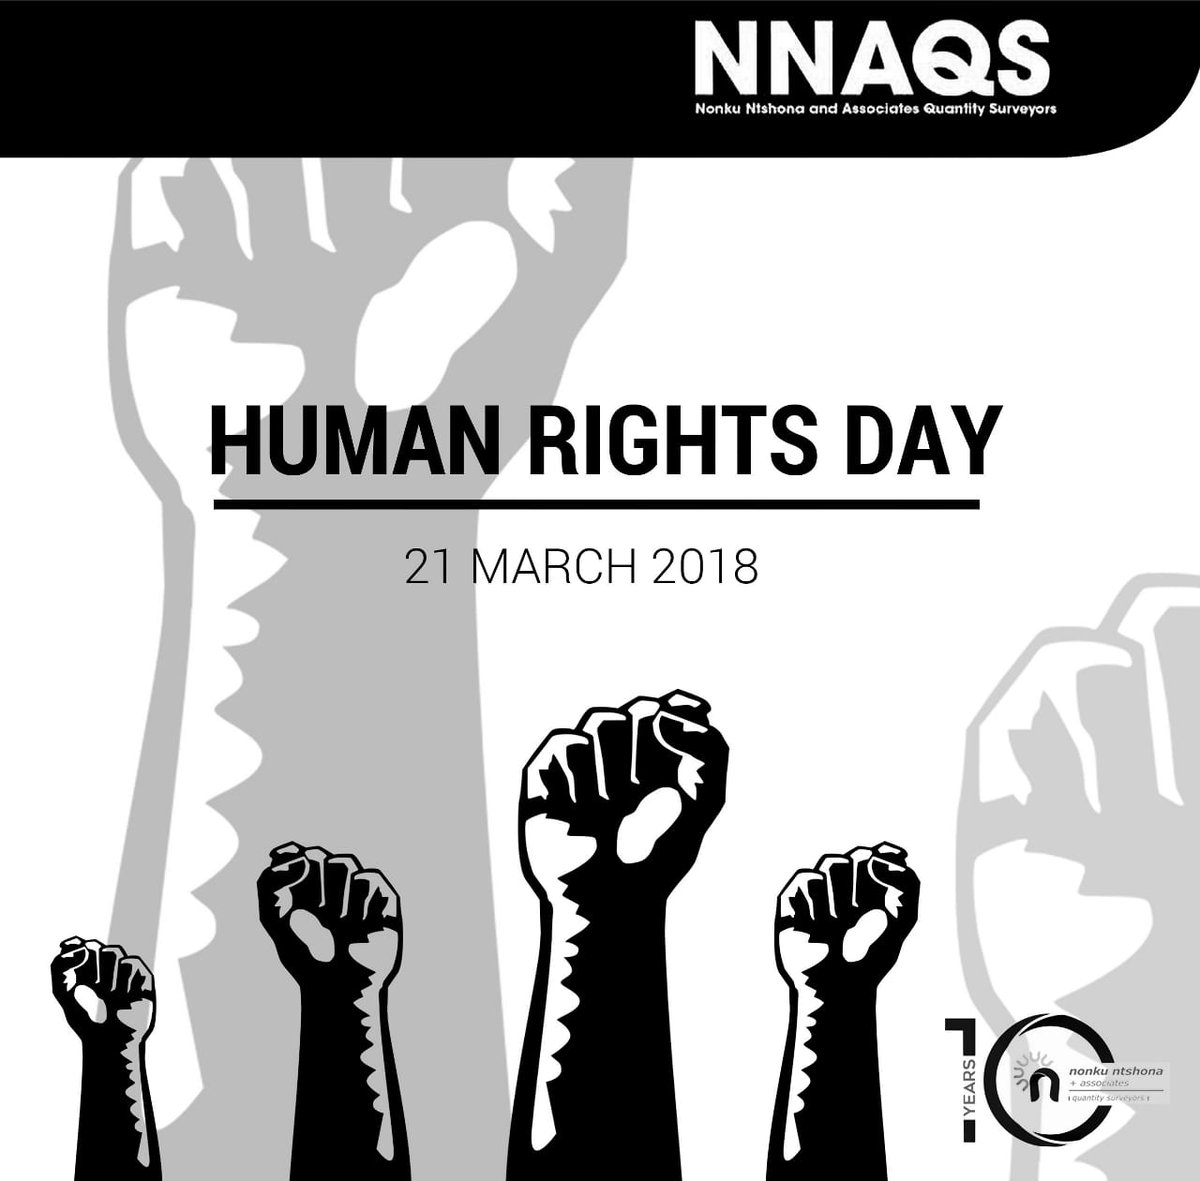 Nonkuntshona Assoc Human Rights Day Commemorates The Sharpeville Massacre Which Occurred On The 21st Of March 1960 Fast Foward 58 Years We As South Africans Have The Bill Of